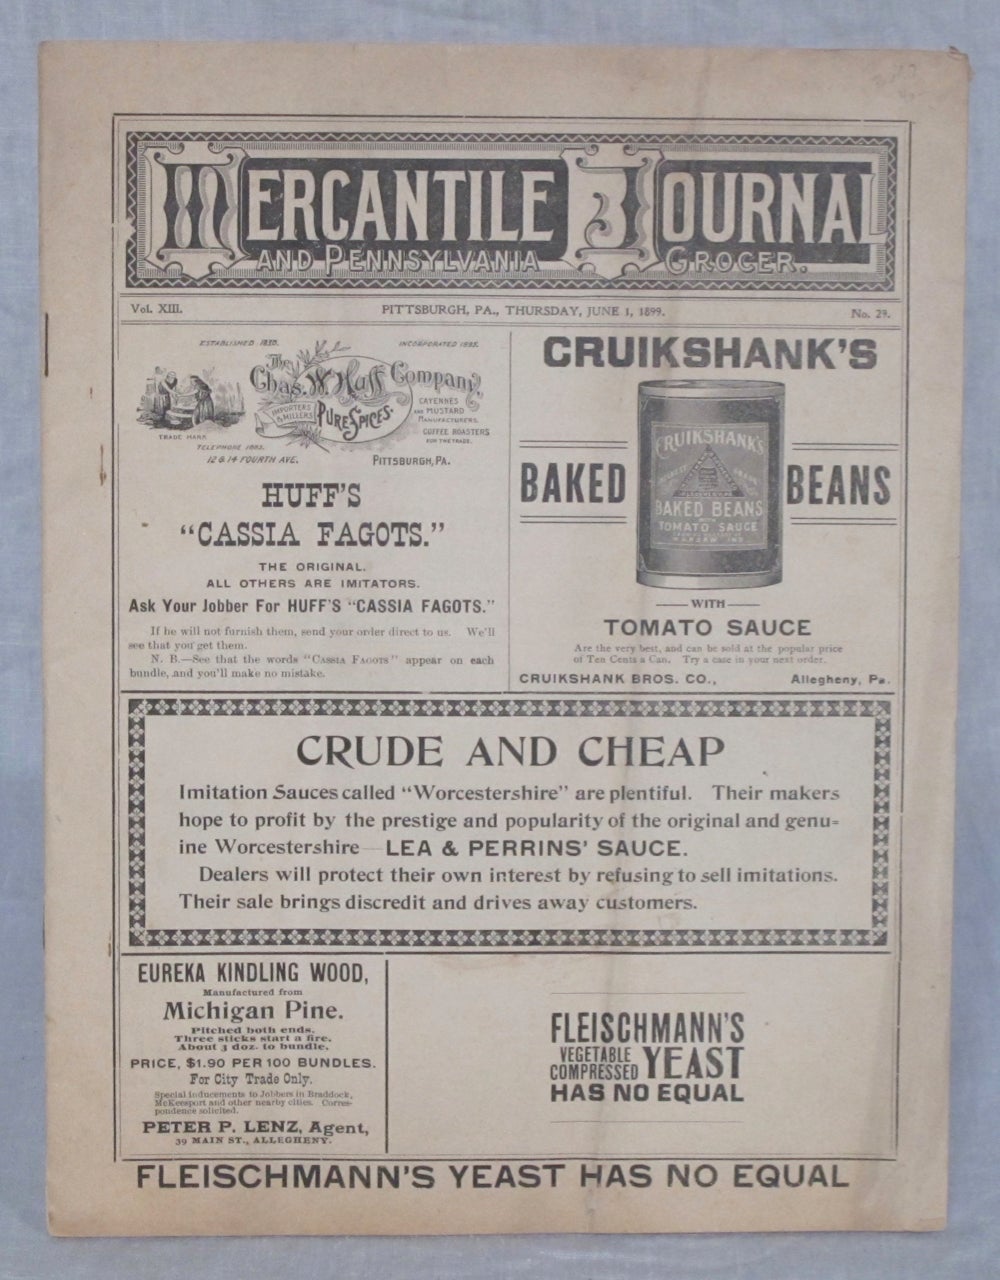 Item #3640 Mercantile Journal and Pennsylvania Grocer. Vol. XIII No. 29, Pittsburgh, PA., Thursday, June 1, 1899. Mercantile Journal, Pennsylvania Grocer.